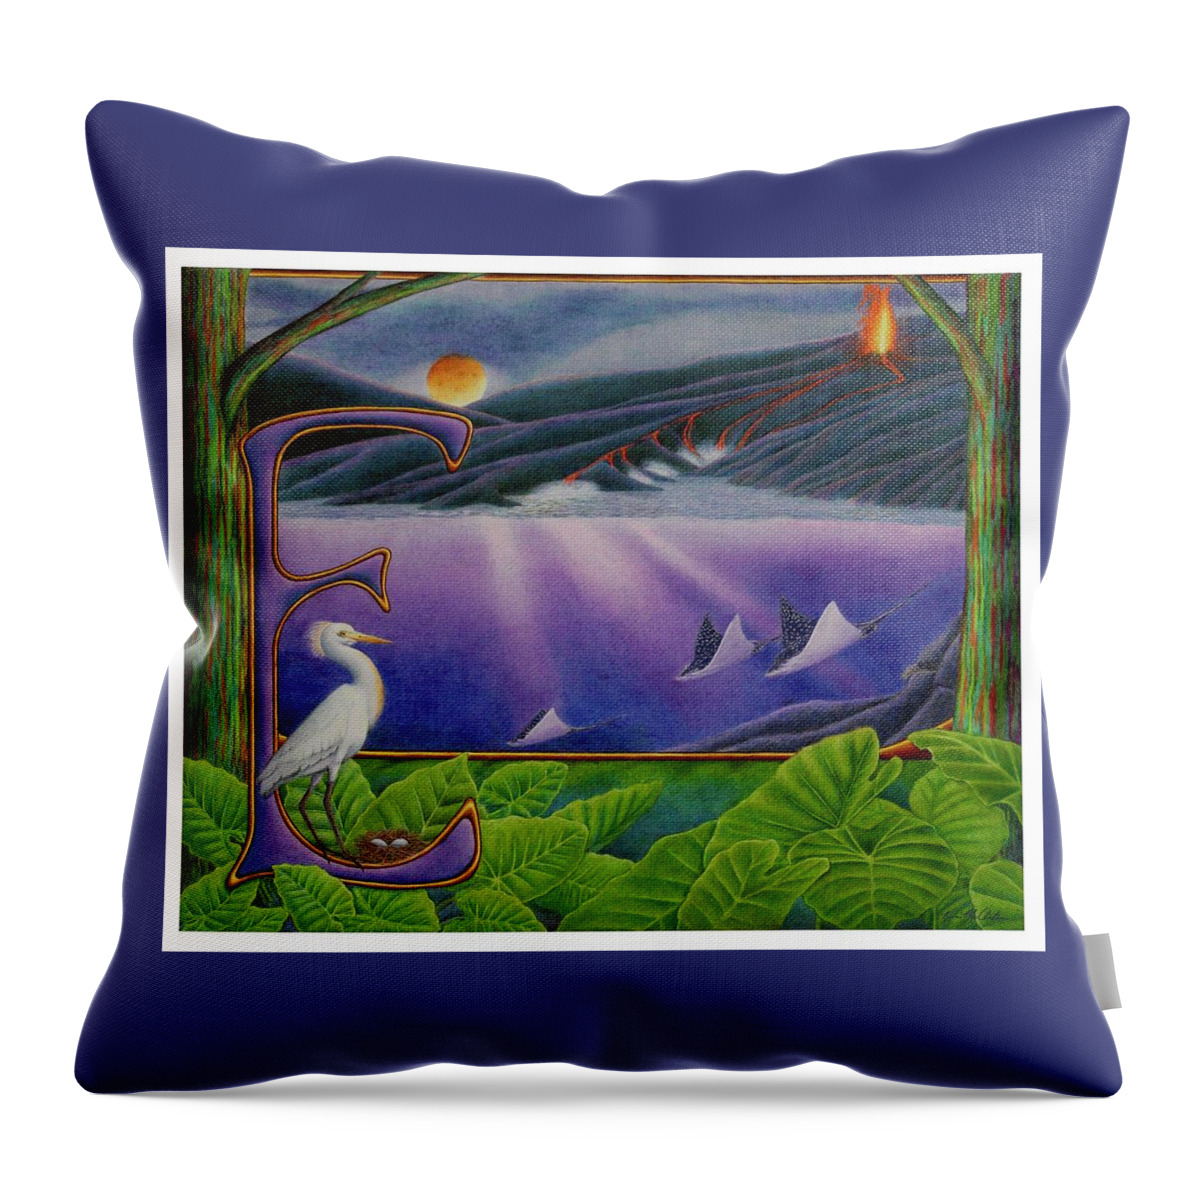 Kim Mcclinton Throw Pillow featuring the drawing E is for Egret by Kim McClinton